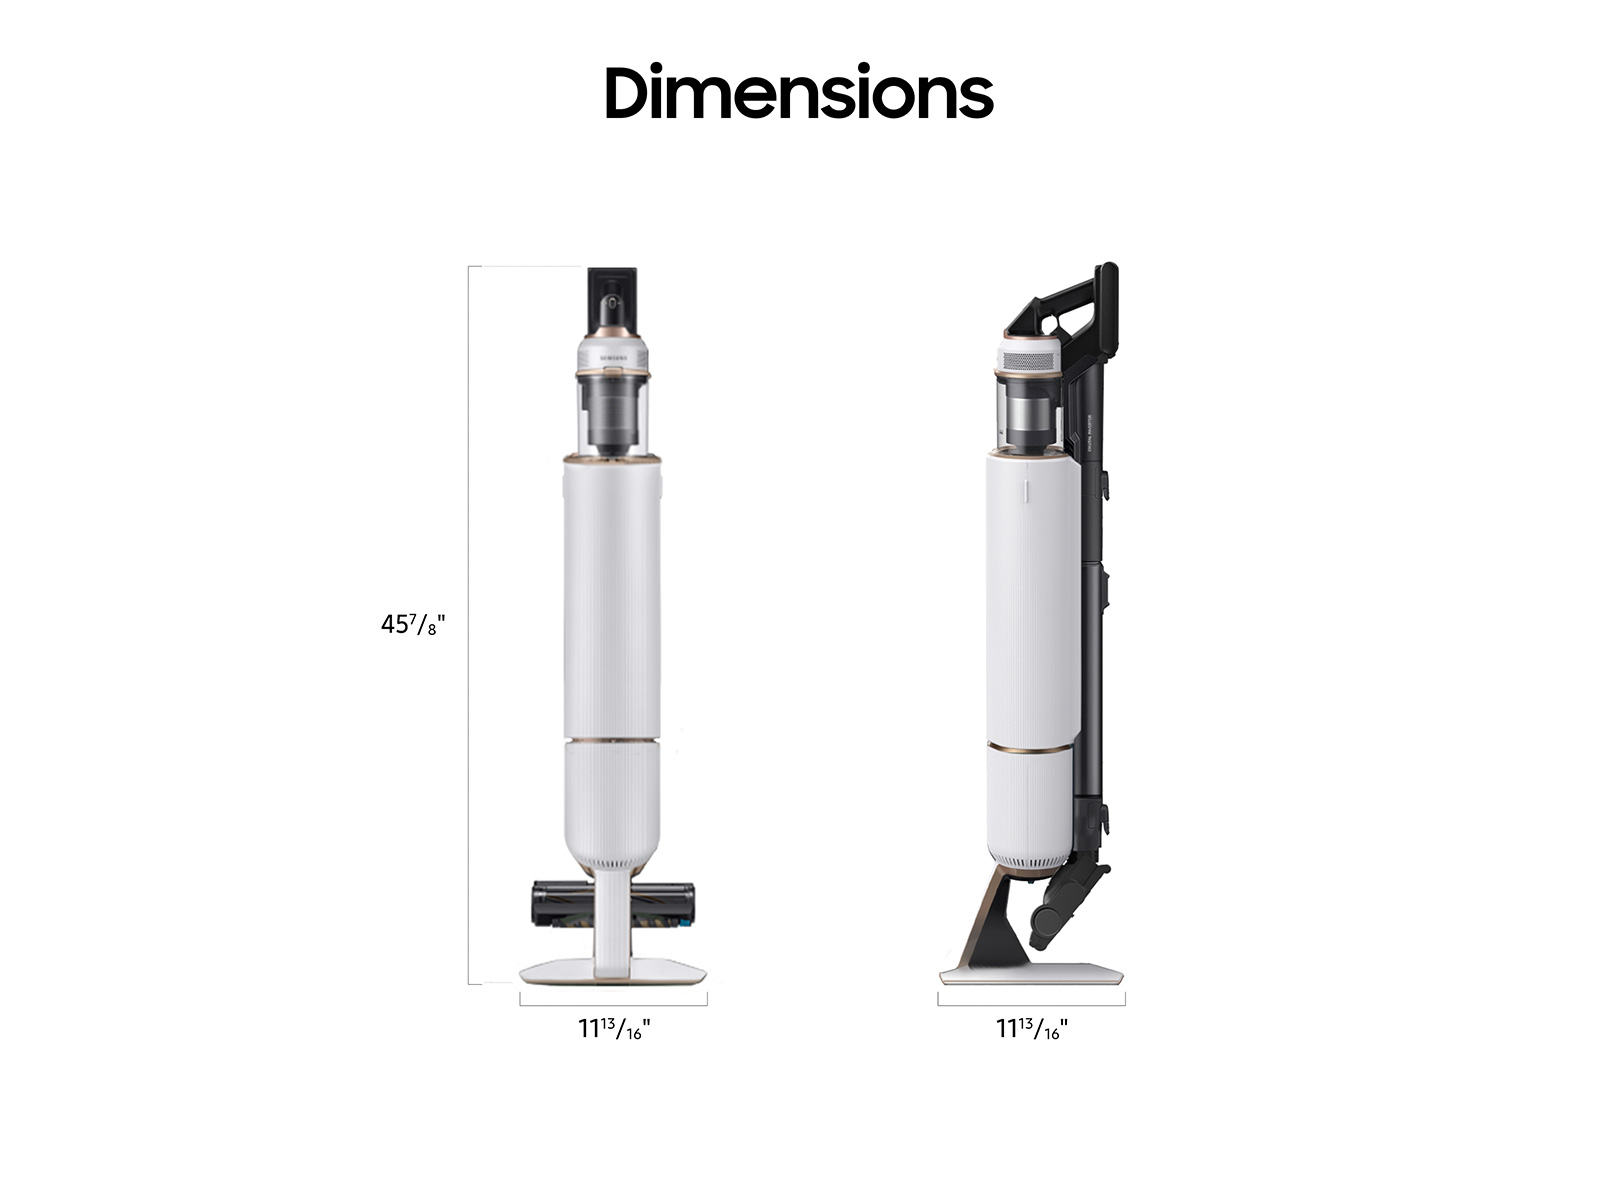 Thumbnail image of Bespoke Jet™ Cordless Stick Vacuum with All-in-One Clean Station® in Misty White